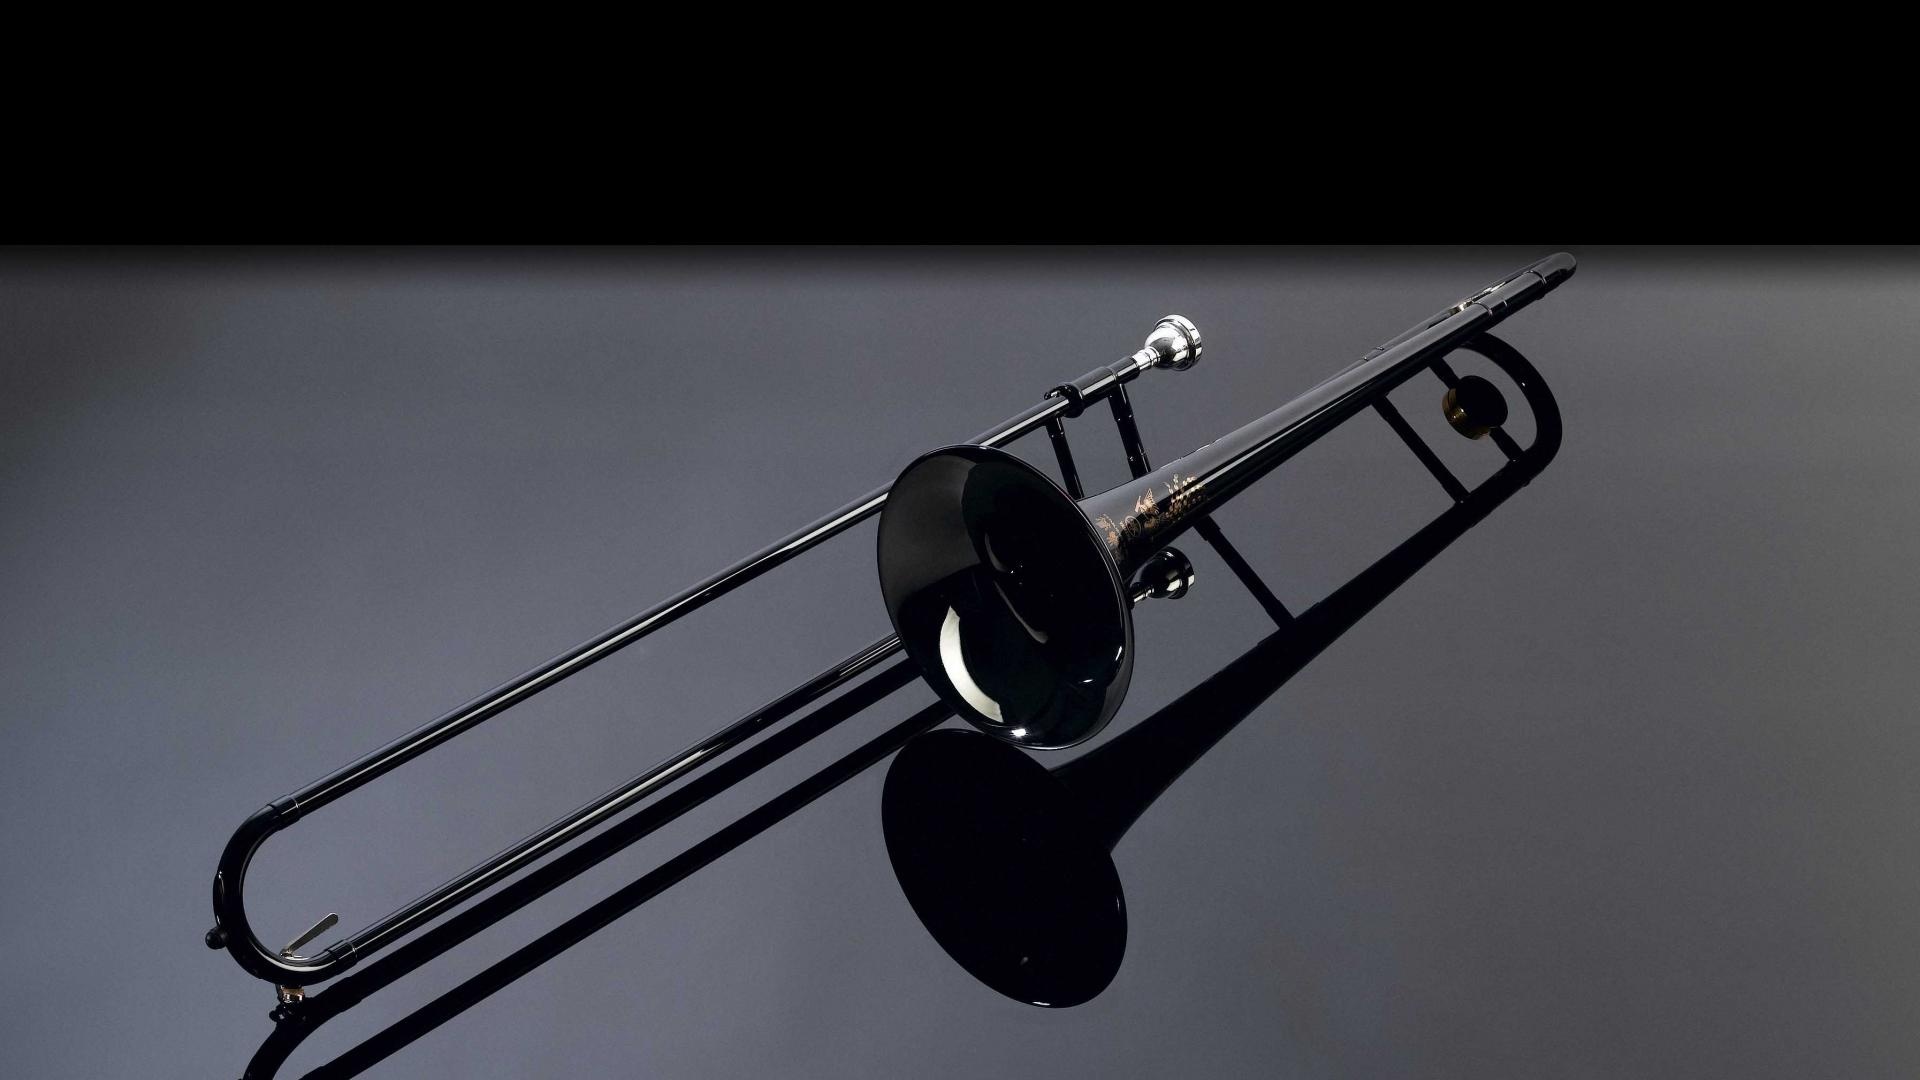 Trombone: Monochrome, Jazz music, A musical instrument played by sliding a U-shaped tube in and out. 1920x1080 Full HD Wallpaper.